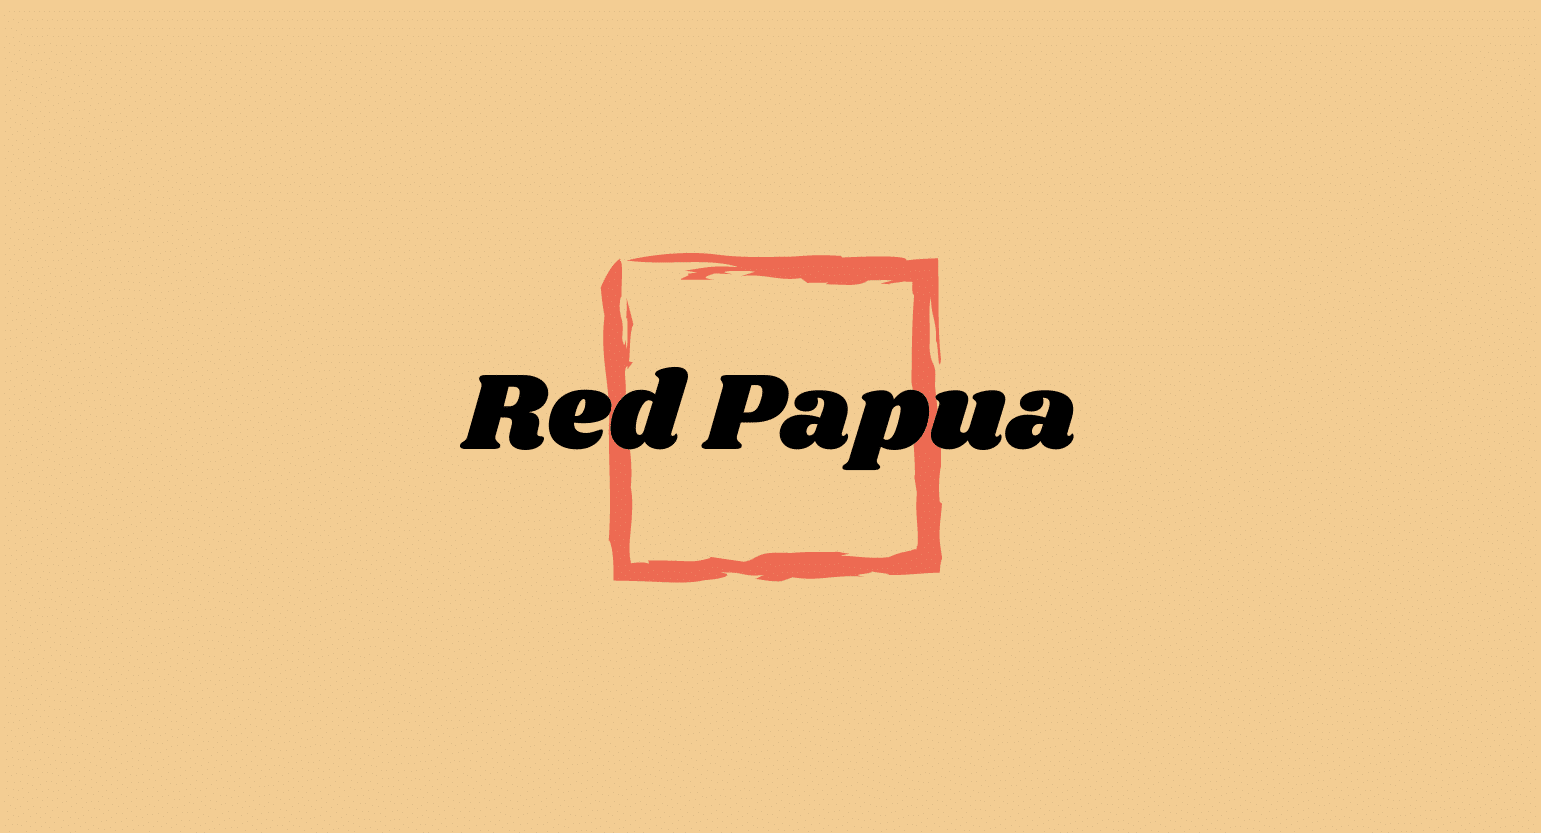 What Is Red Papua Kratom? Effects, Dosage, Safety & More